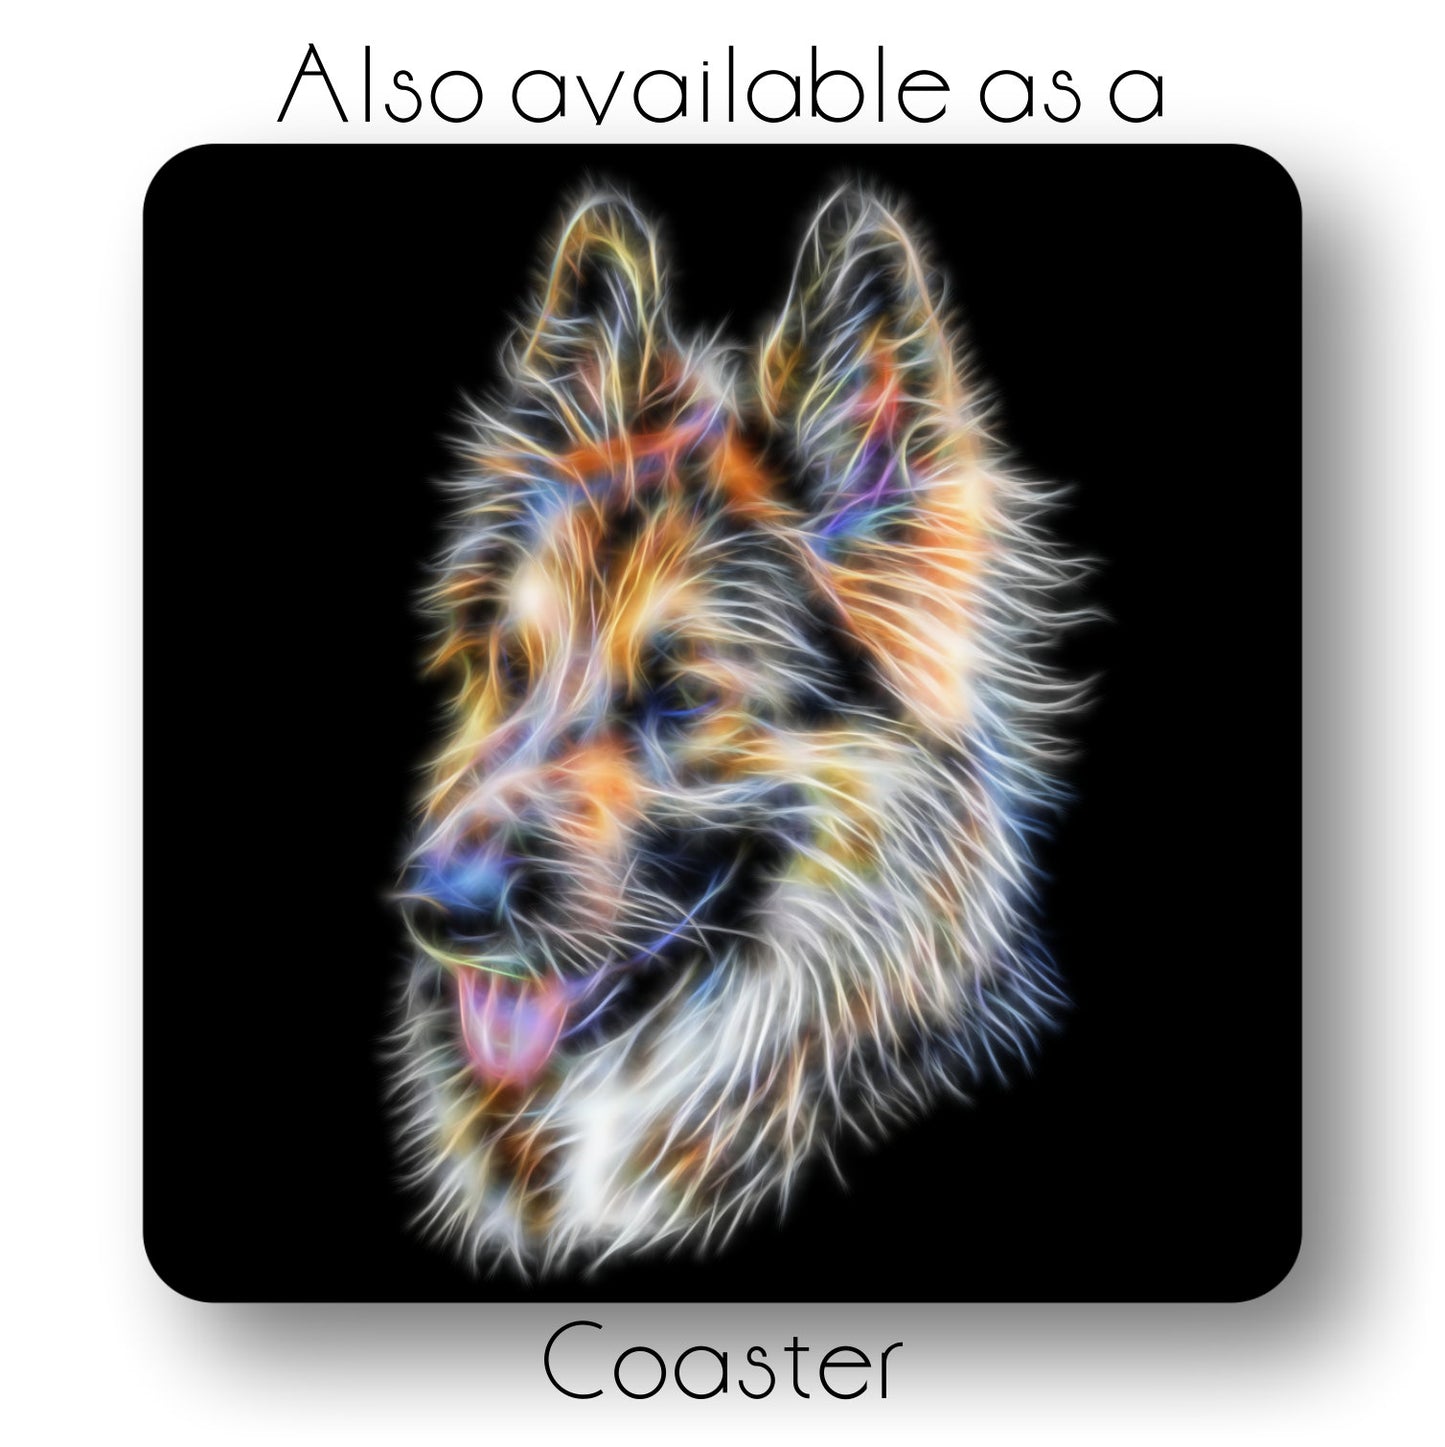 Long Haired German Shepherd Metal Wall Plaque. Also available as Mouse Pad, Keychain or Coaster.